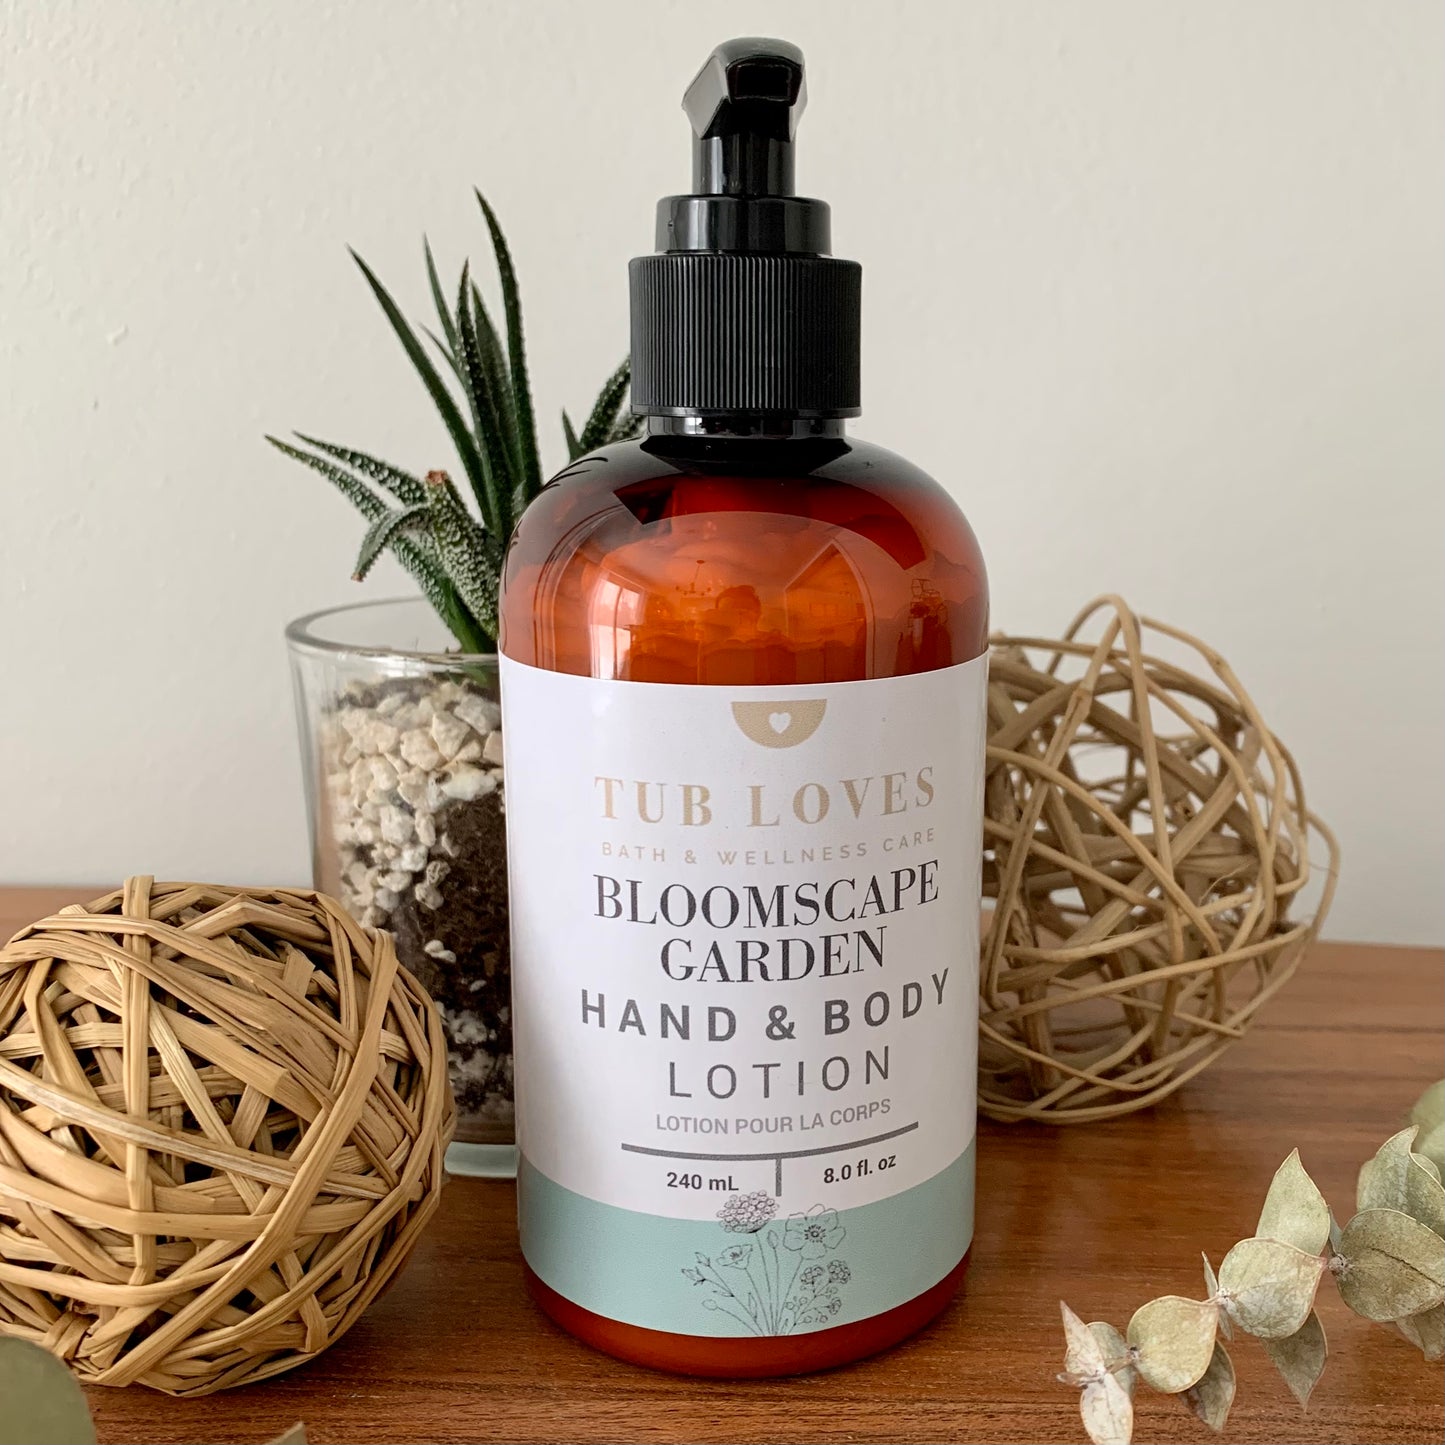 Bloomscape Garden - Hand & Body Lotion